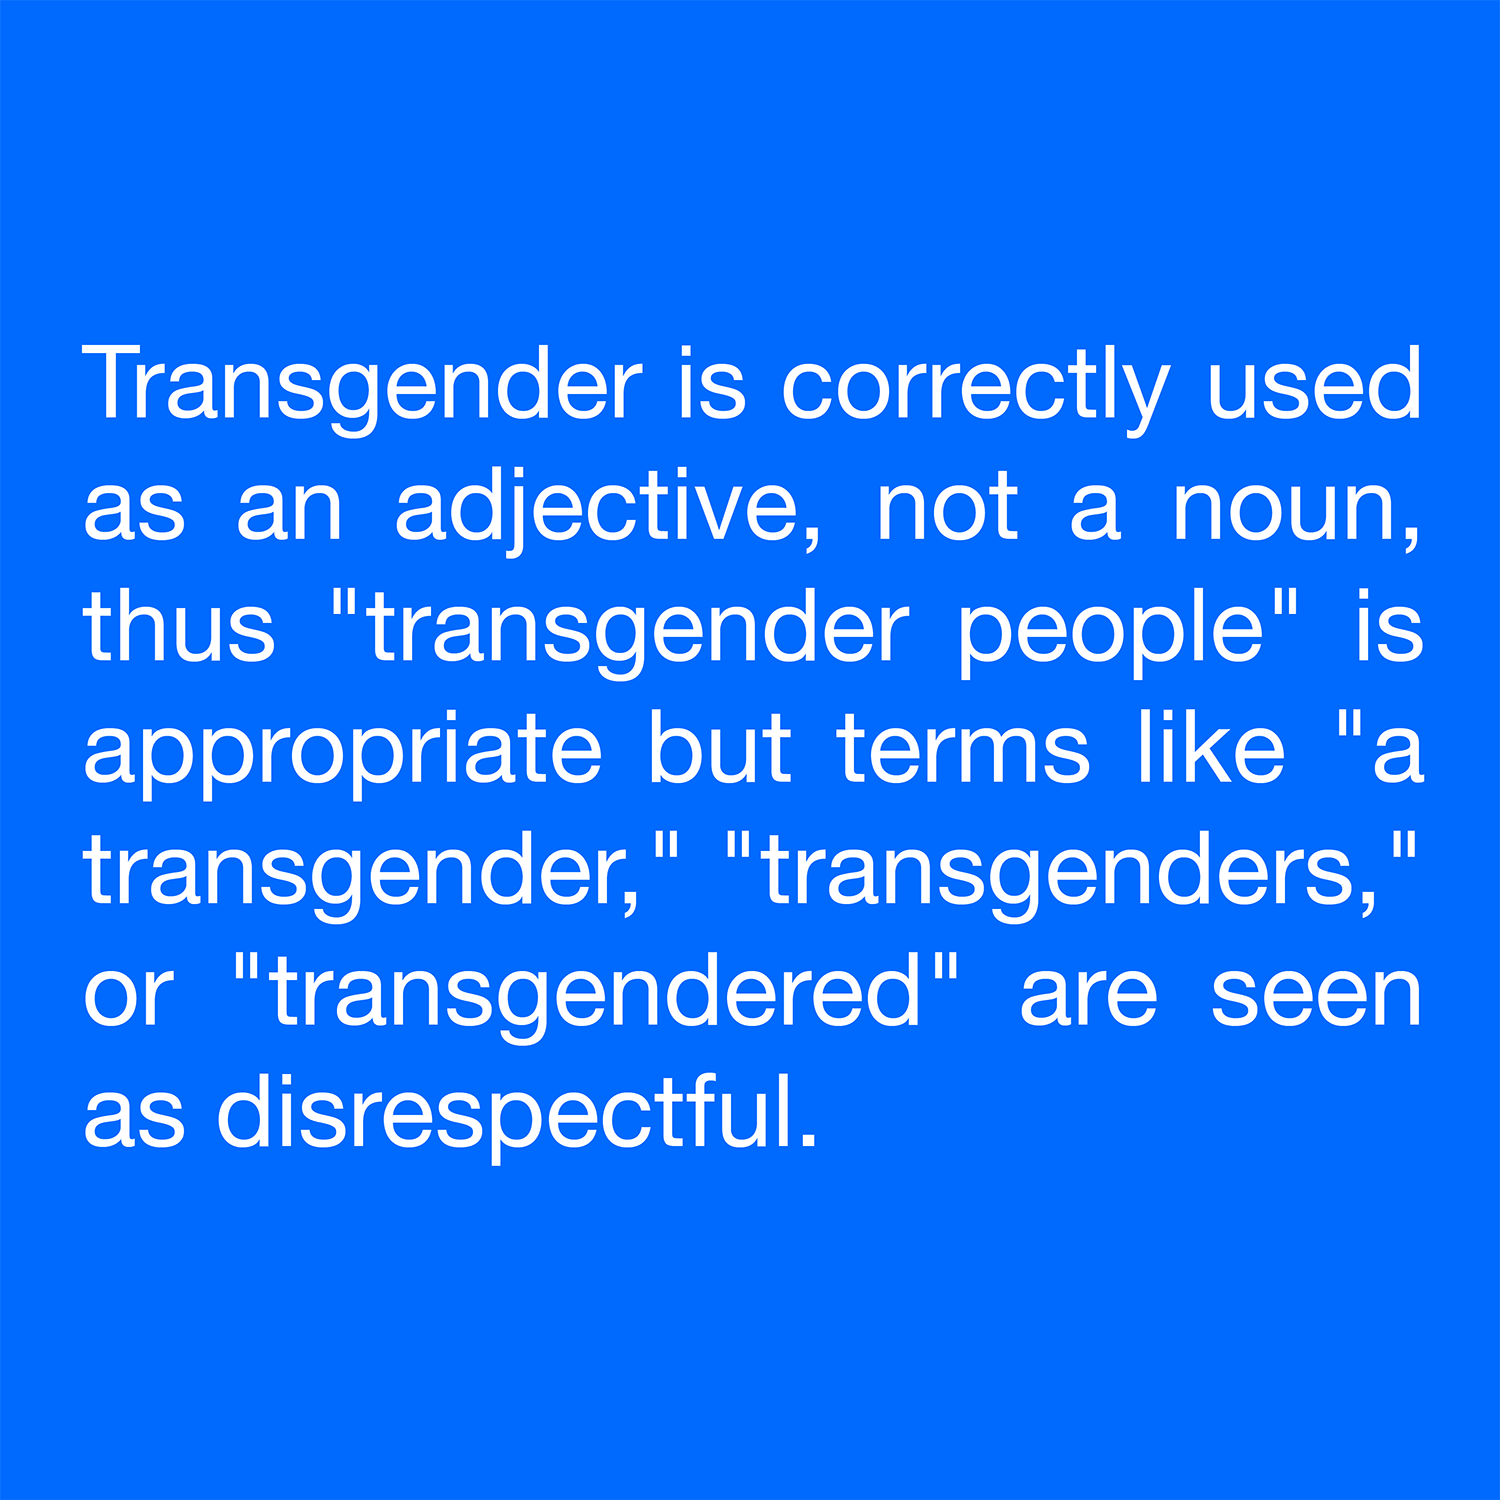  Transgender is correctly used as an adjective, not a noun, thus "transgender people" is appropriate but terms like "a transgender," "transgenders," or "transgendered" are seen as disrespectful. 